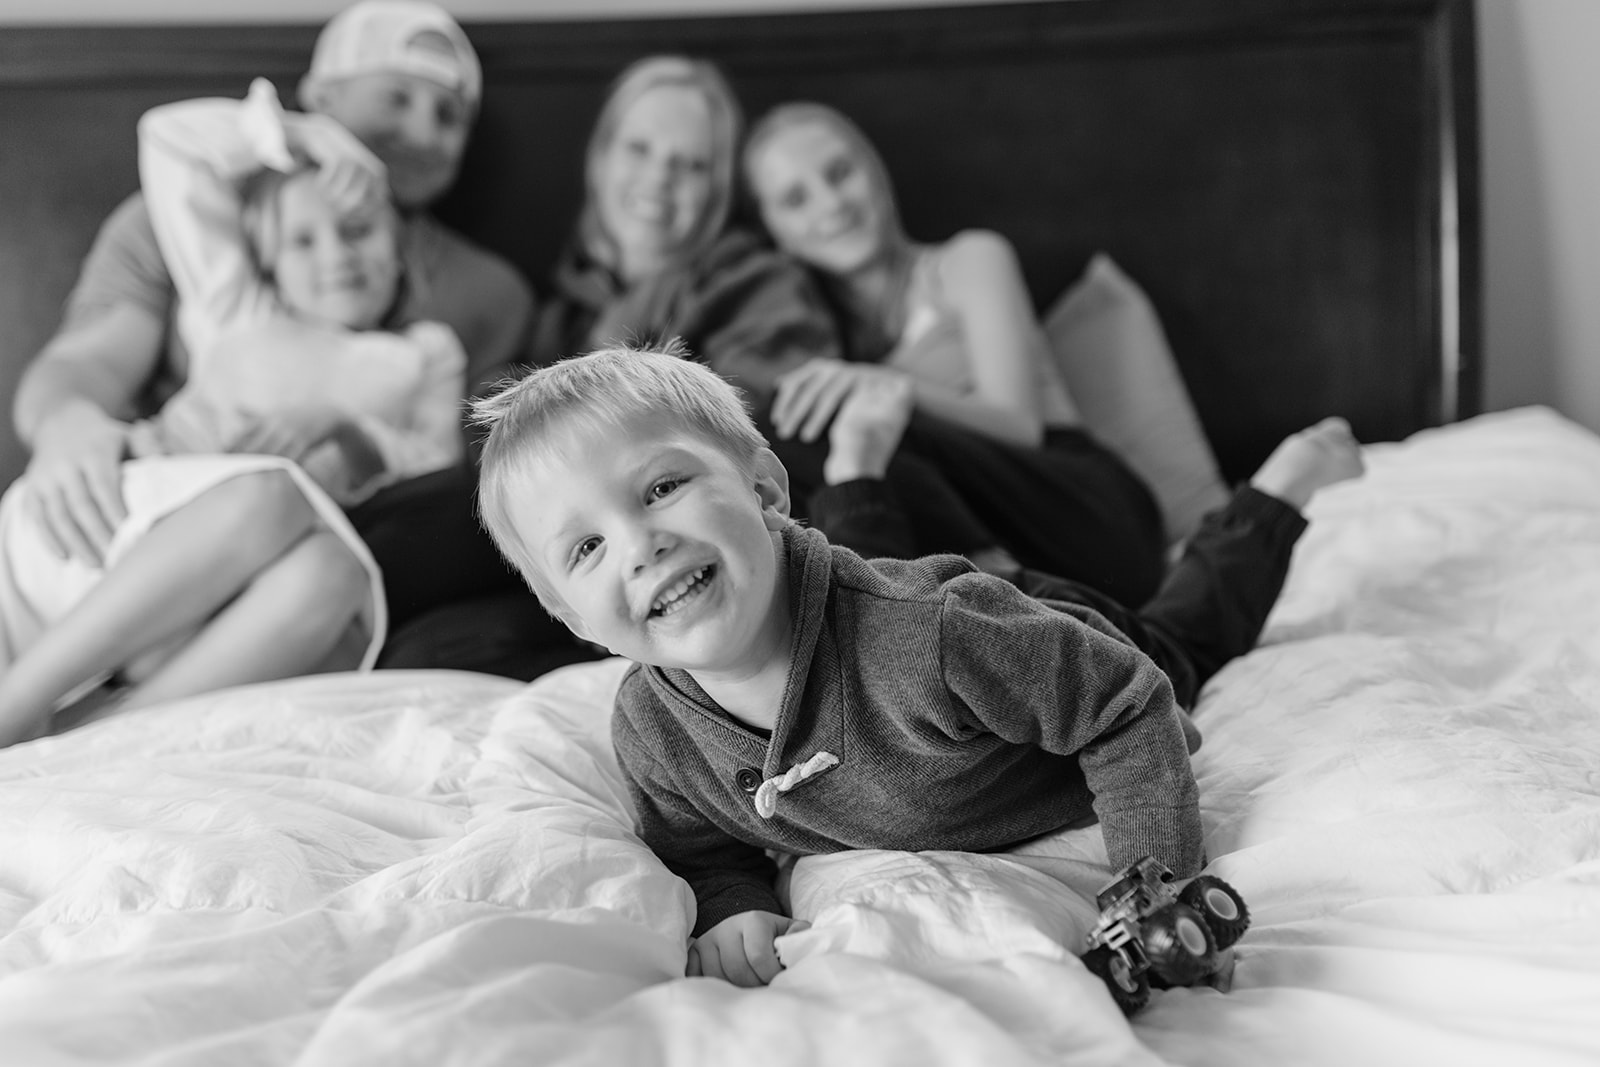 A day in the life, documentary family photography at home during winter